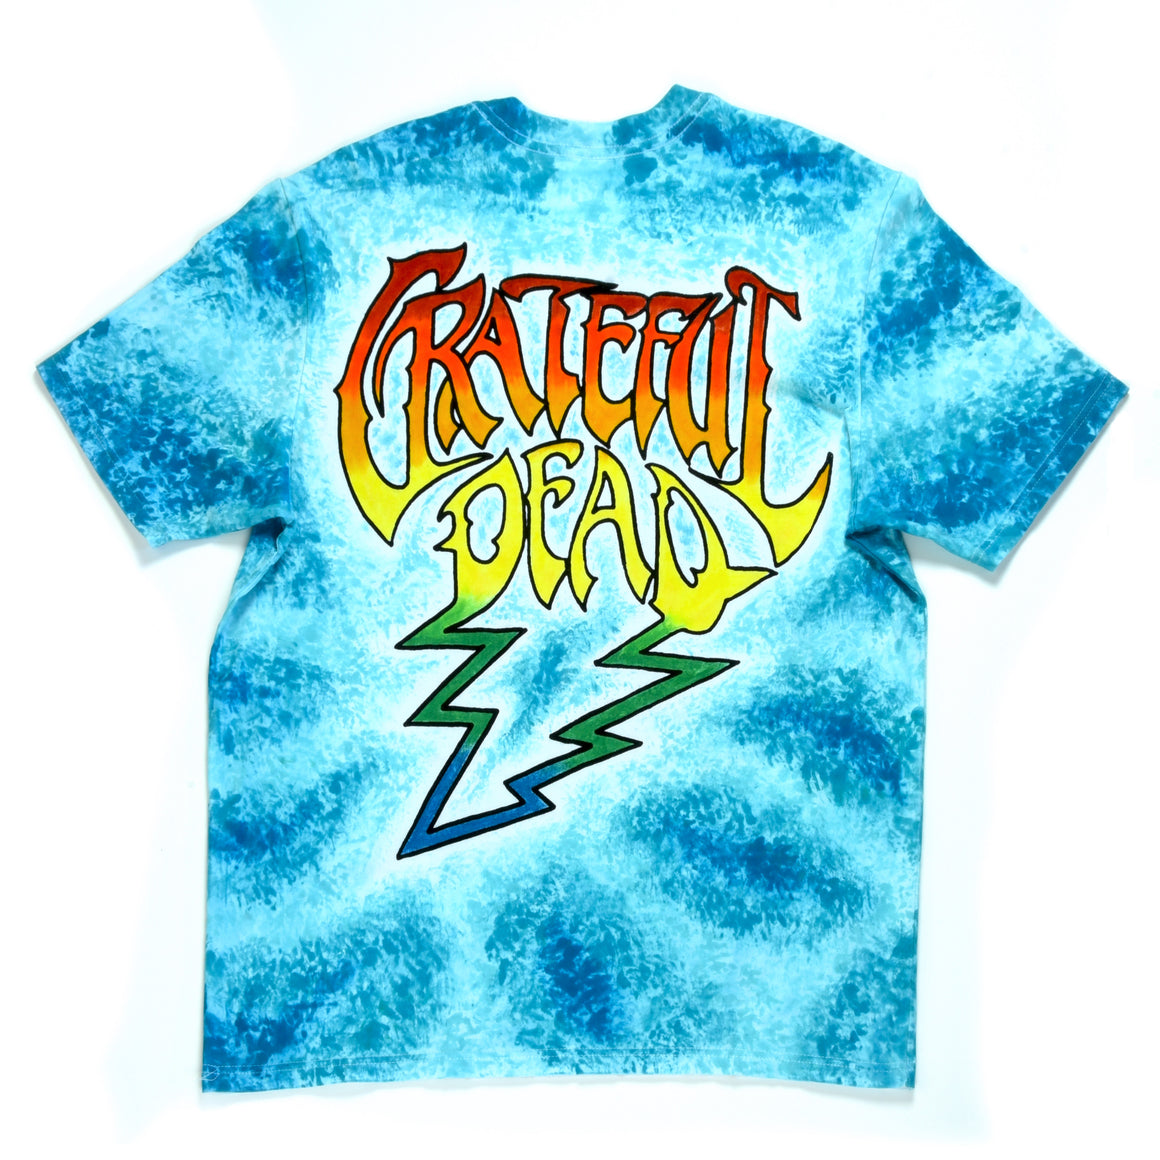 Large - Hand-painted and Dyed T-Shirt - Grateful Dead Bertha